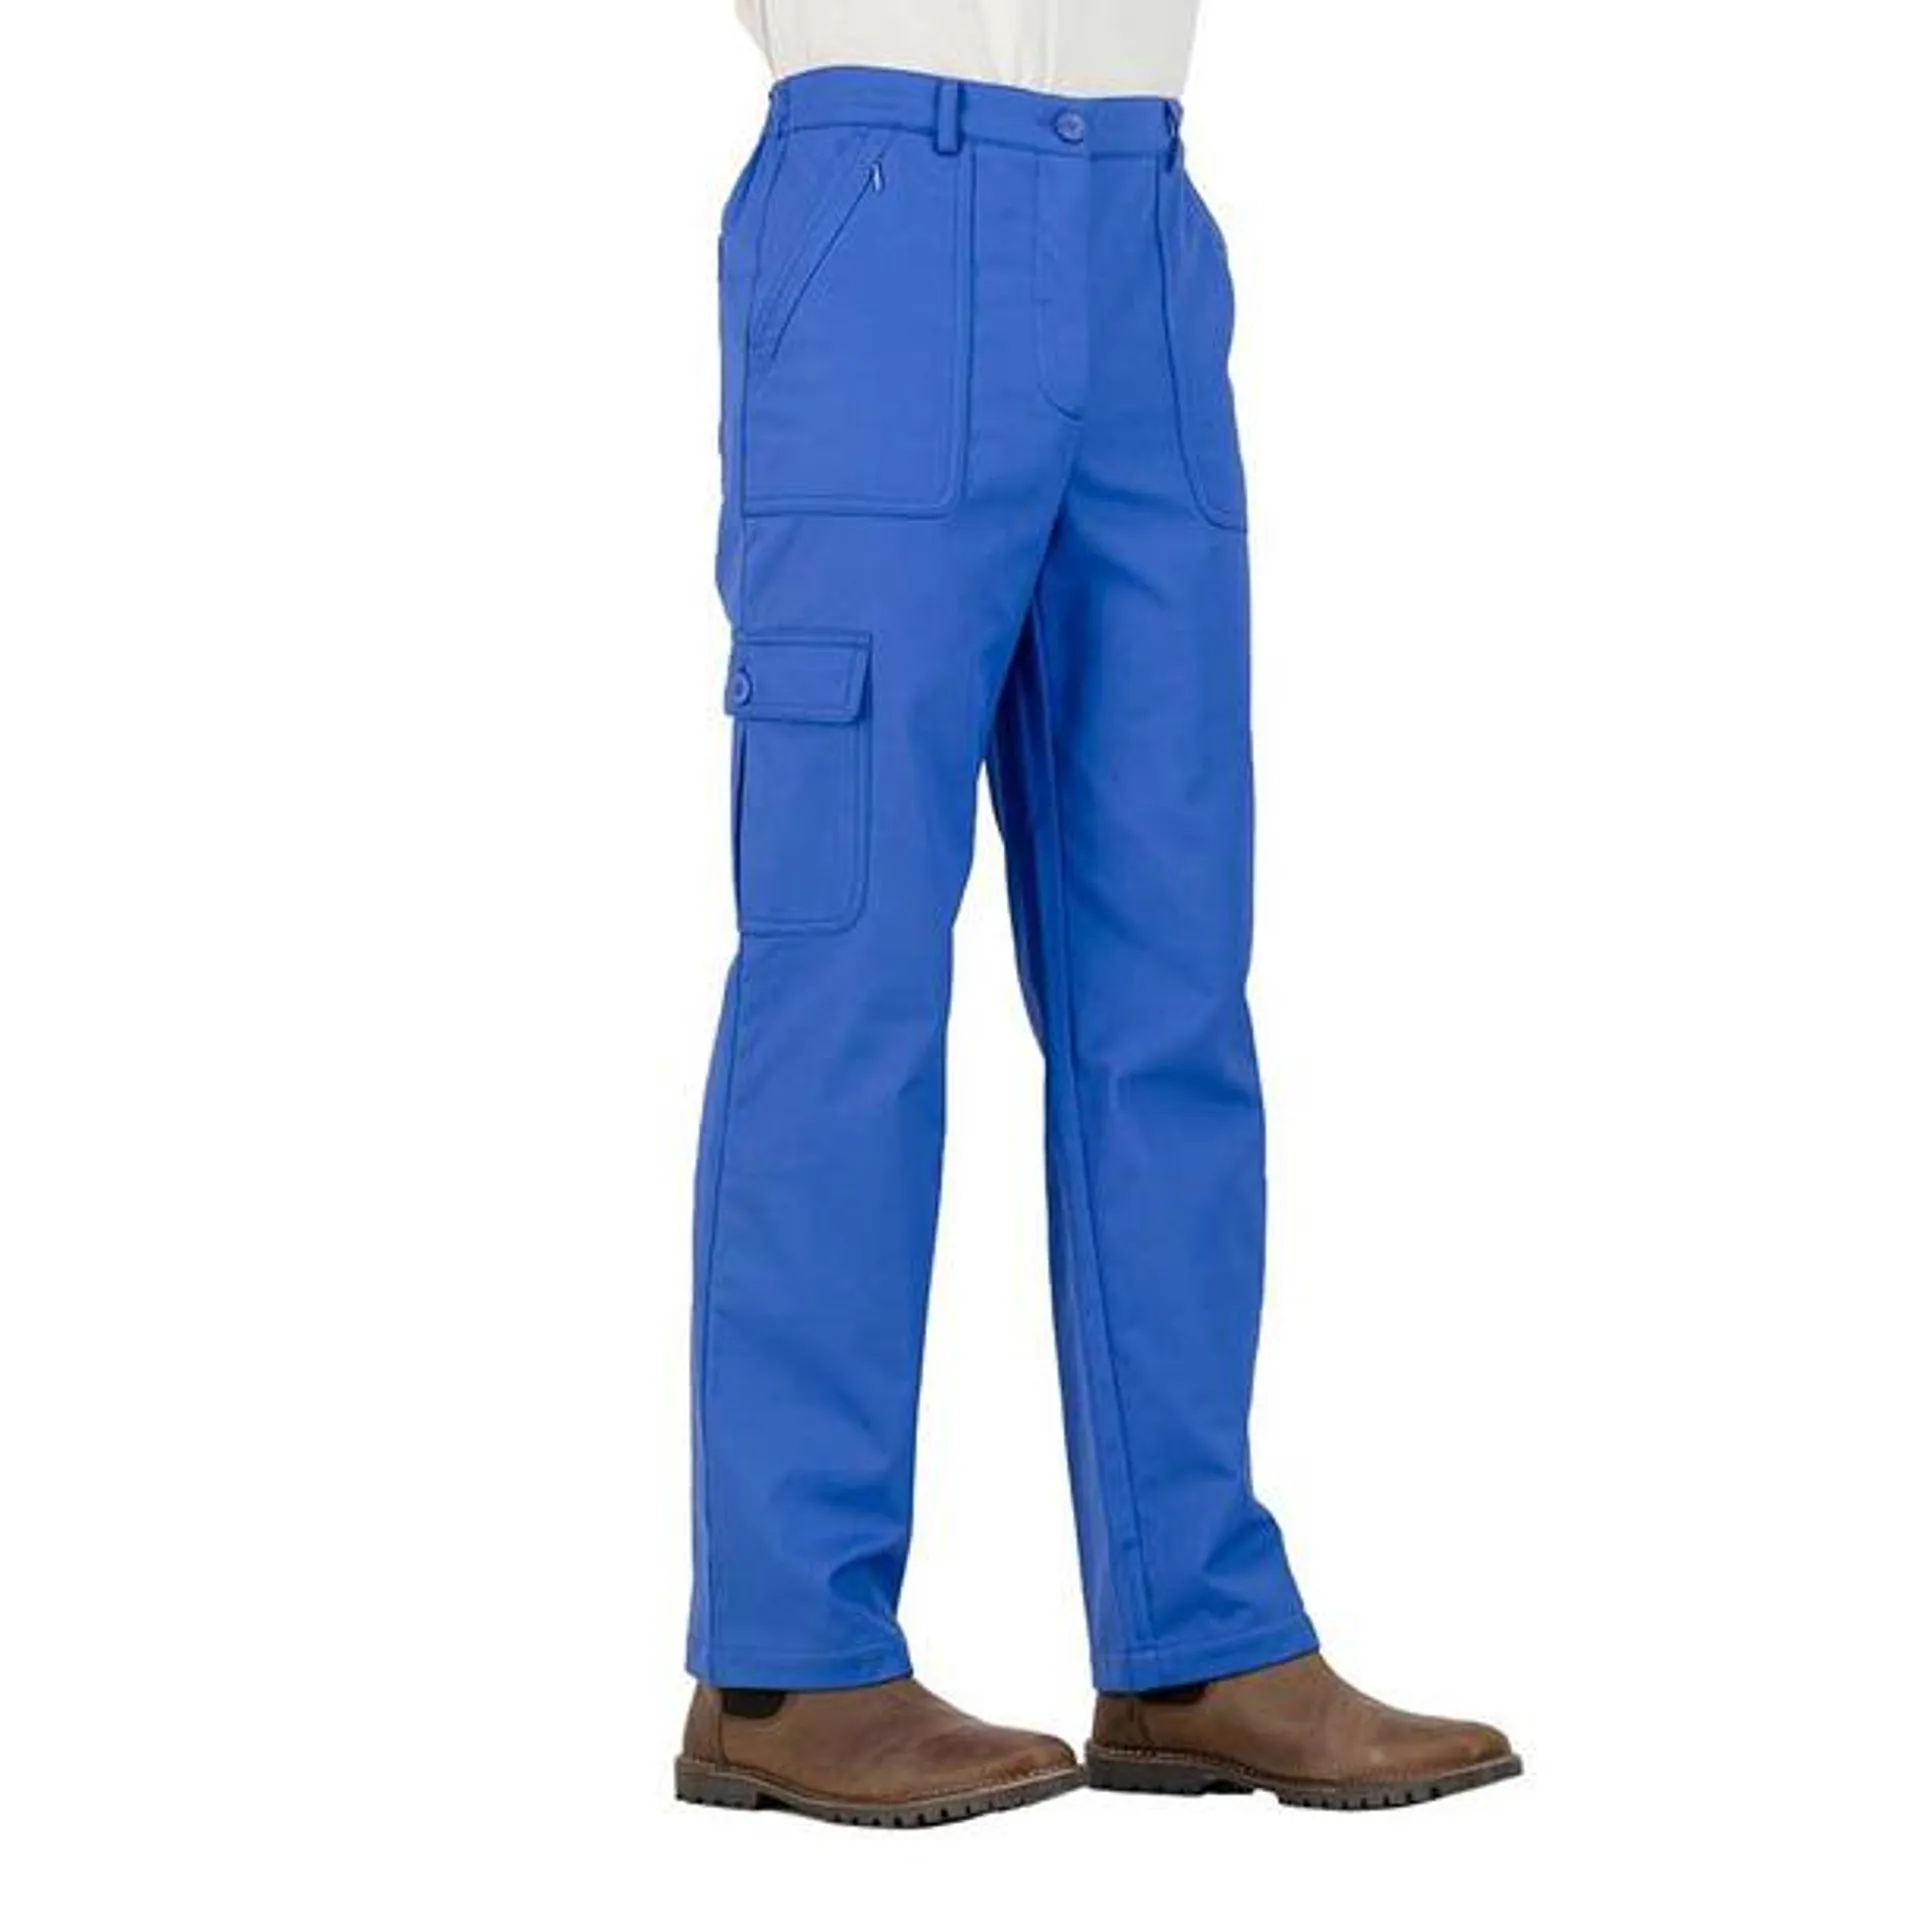 Lined men's Trousers